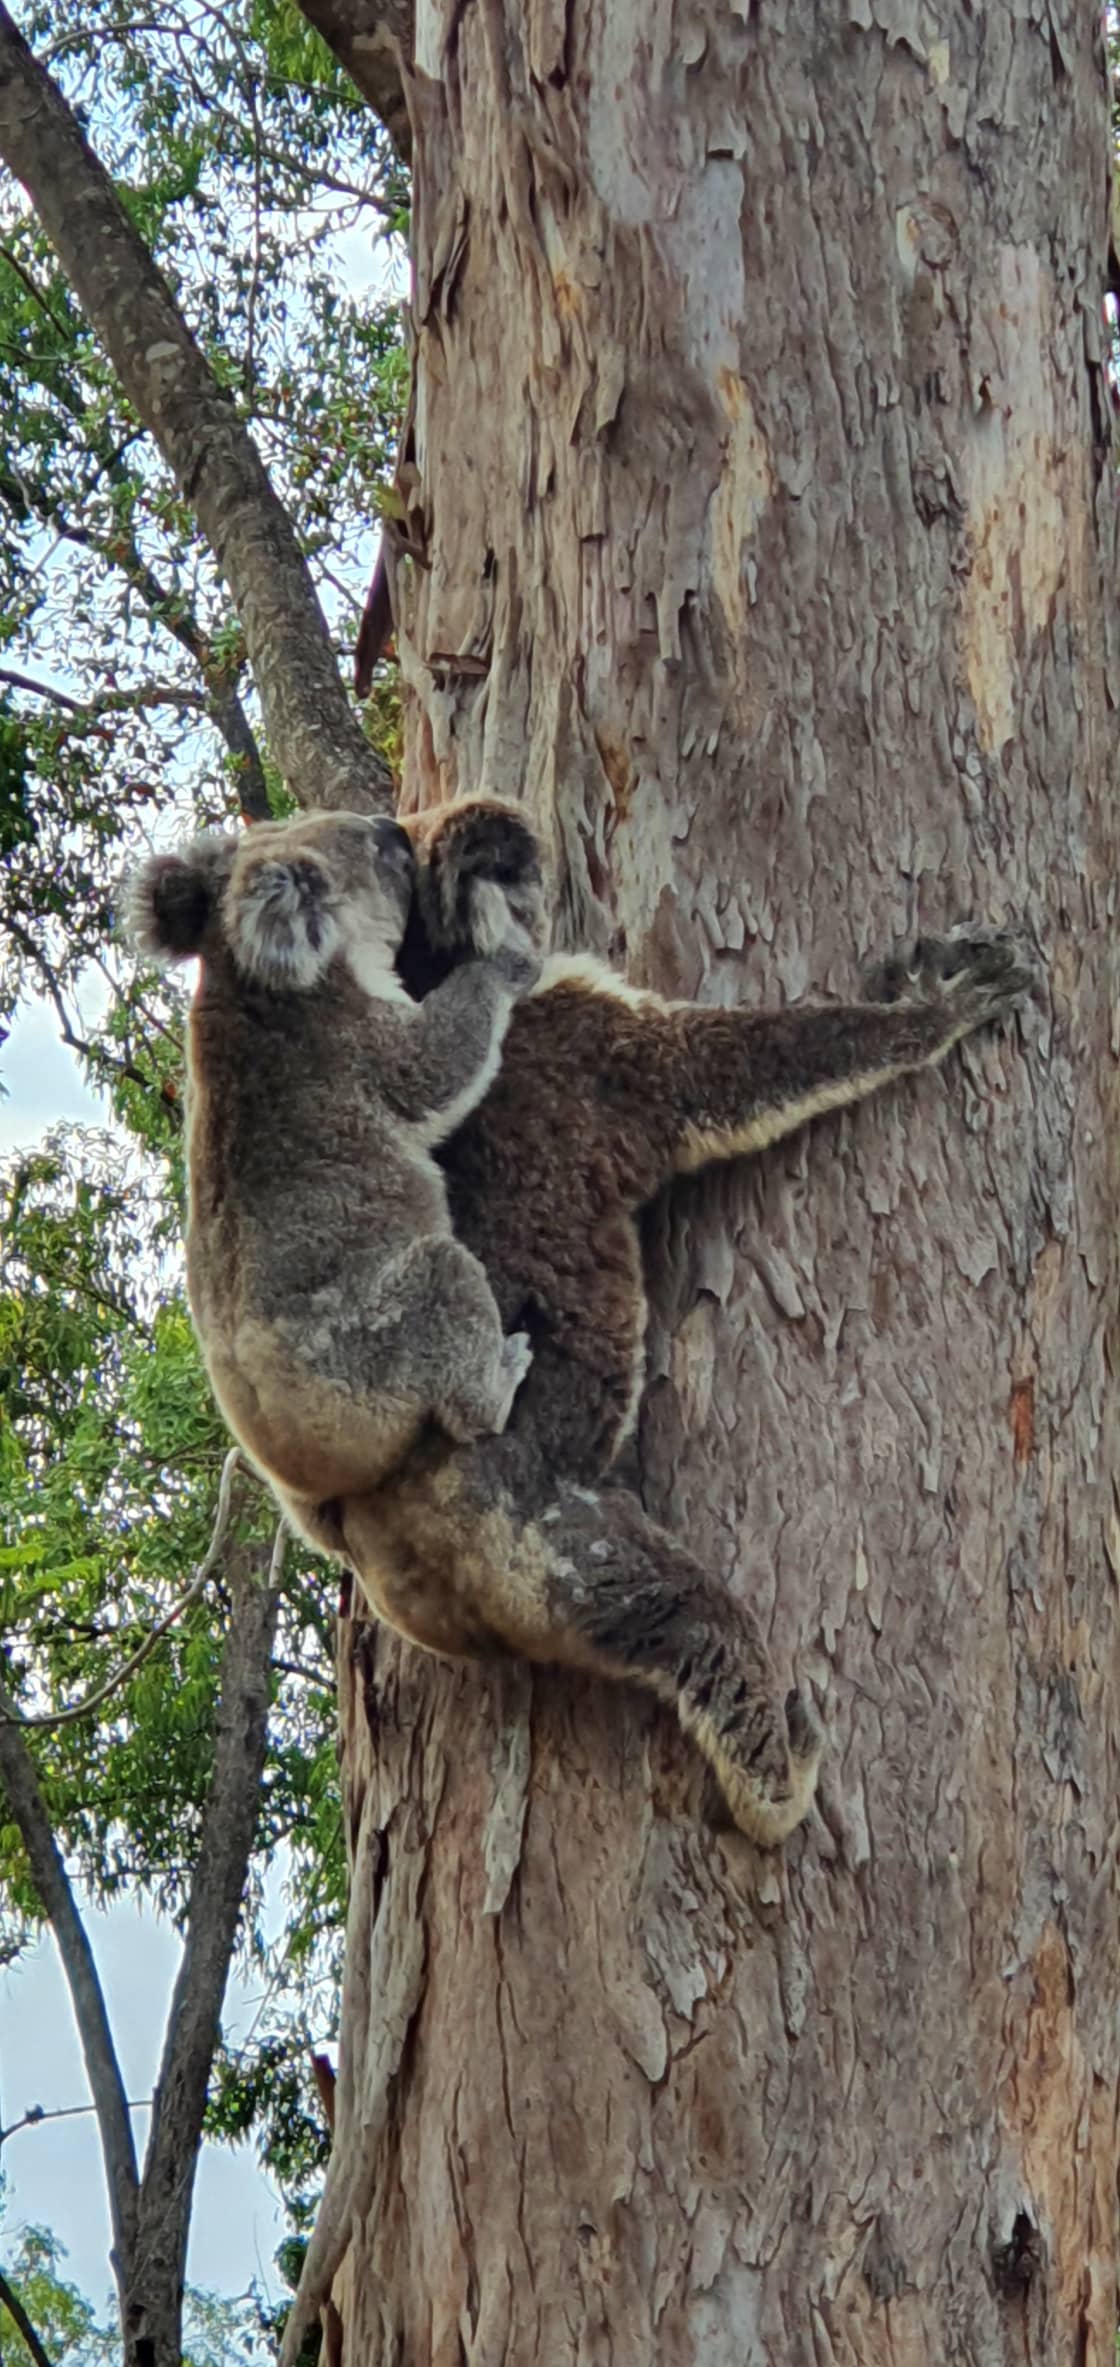 The local Koalas roam around the local properties so you may see them and may not. This shot was taken right next to our carport.